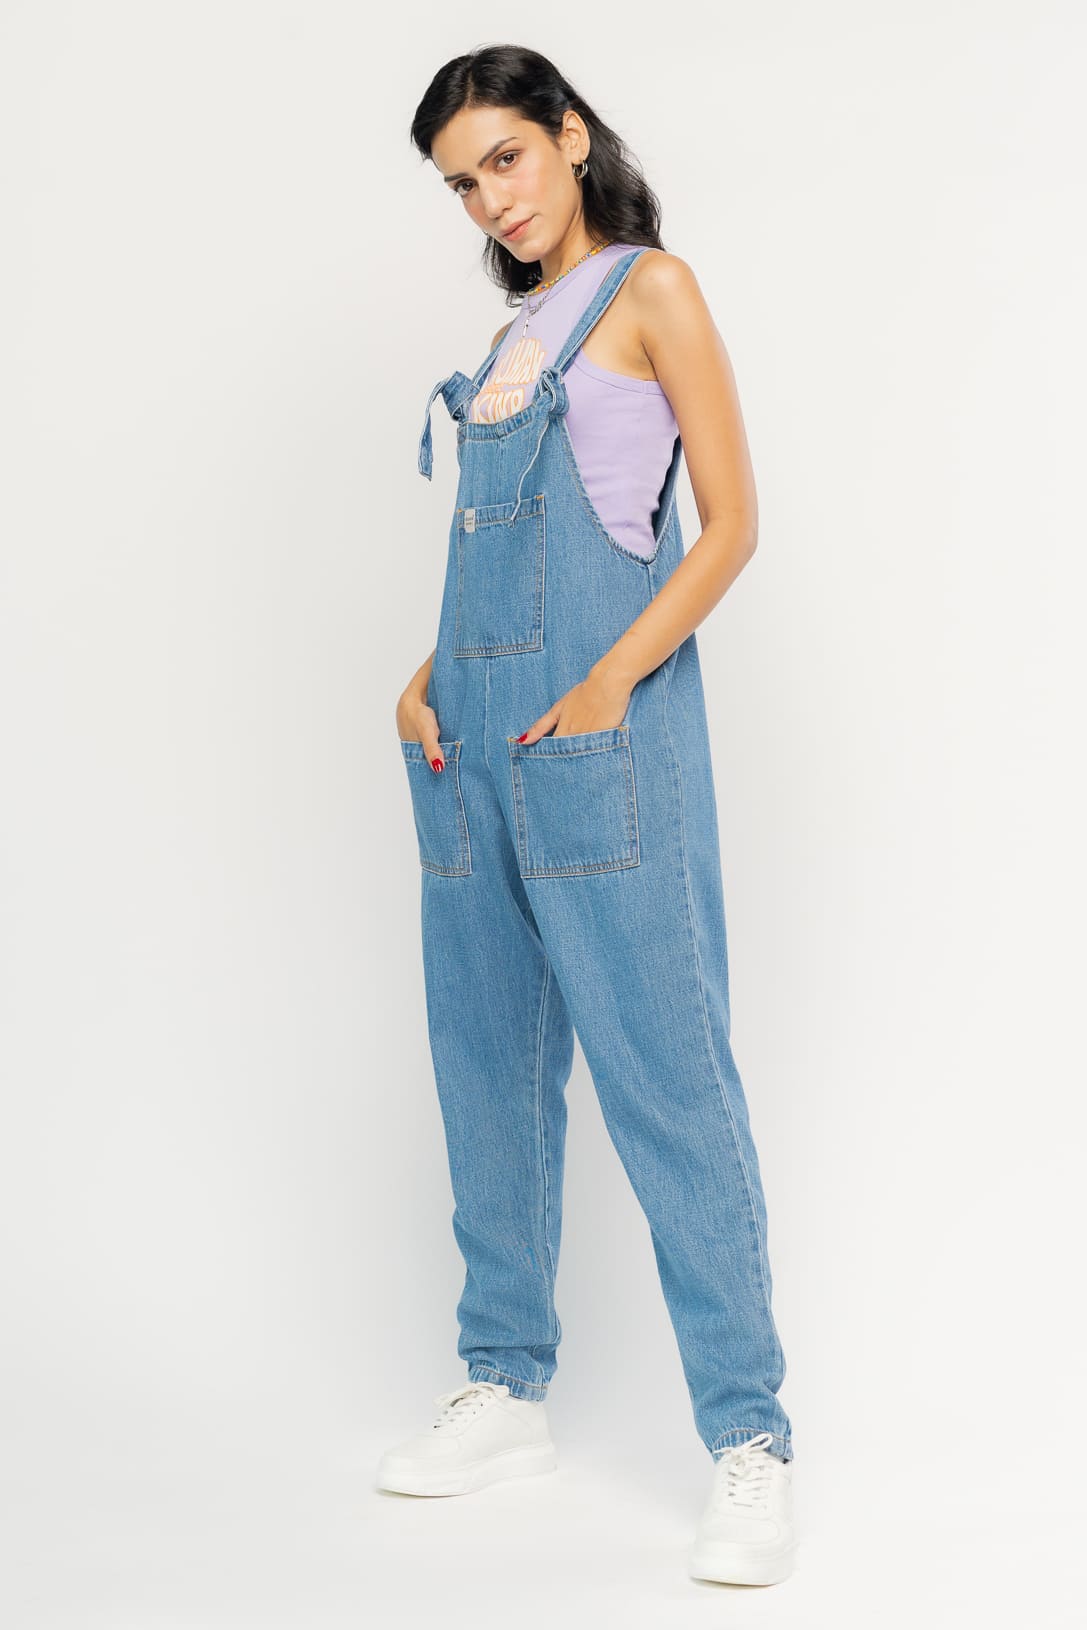 Shop Denim Dungarees with Embroidery and Pocket Detail Online | Max UAE